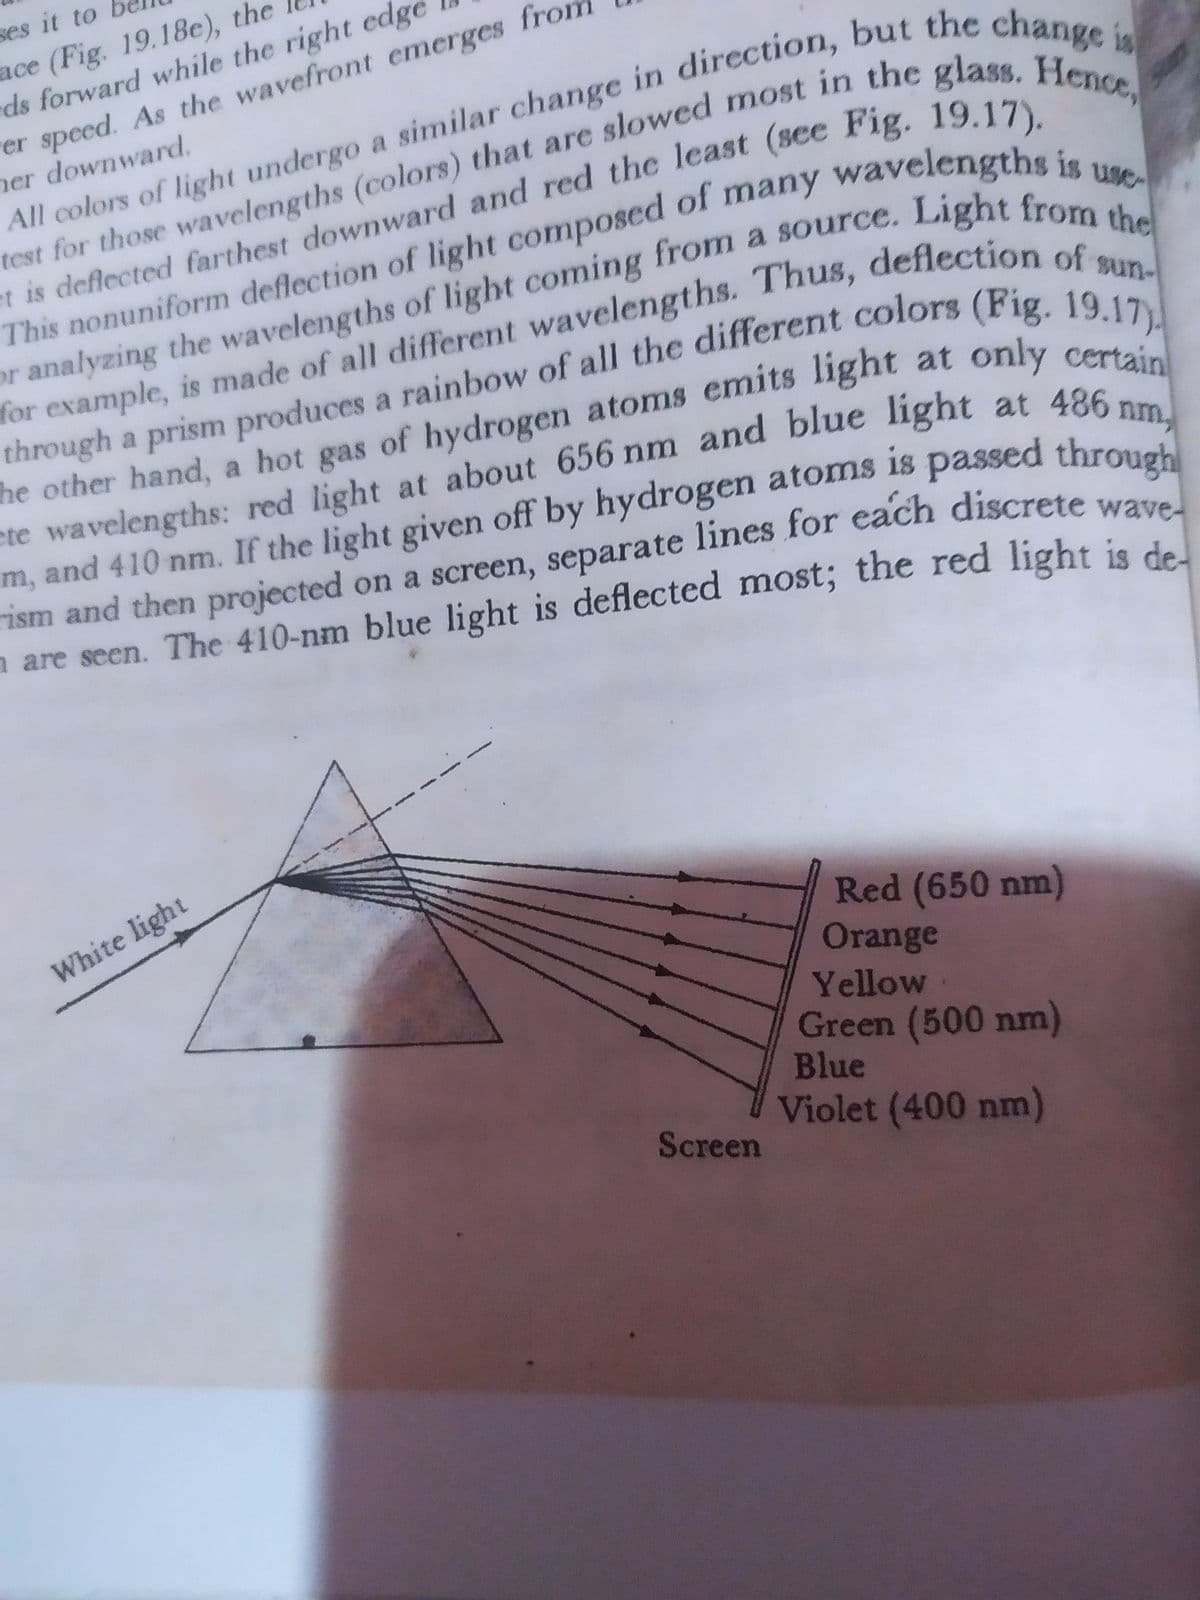 ses it to
ace (Fig. 19.18e), the
ds forward while the right edge
speed. As the wavefront emerges fr
her downward.
All colors of light undergo a similar change in direction, but the change is
test for those wavelengths (colors) that are slowed most in the glass. Hence,
et is deflected farthest downward and red the least (see Fig. 19.17).
This nonuniform deflection of light composed of many wavelengths is use
or analyzing the wavelengths of light coming from a source. Light from the
for example, is made of all different wavelengths. Thus, deflection of sun-
through a prism produces a rainbow of all the different colors (Fig. 19.17)
he other hand, a hot gas of hydrogen atoms emits light at only certain
te wavelengths: red light at about 656 nm and blue light at 486 nm,
m, and 410 nm. If the light given off by hydrogen atoms is passed through
ism and then projected on a screen, separate lines for each discrete wave-
are seen. The 410-nm blue light is deflected most; the red light is de-
White light
Screen
Red (650 nm)
Orange
Yellow
Green (500 nm)
Blue
Violet (400 nm)